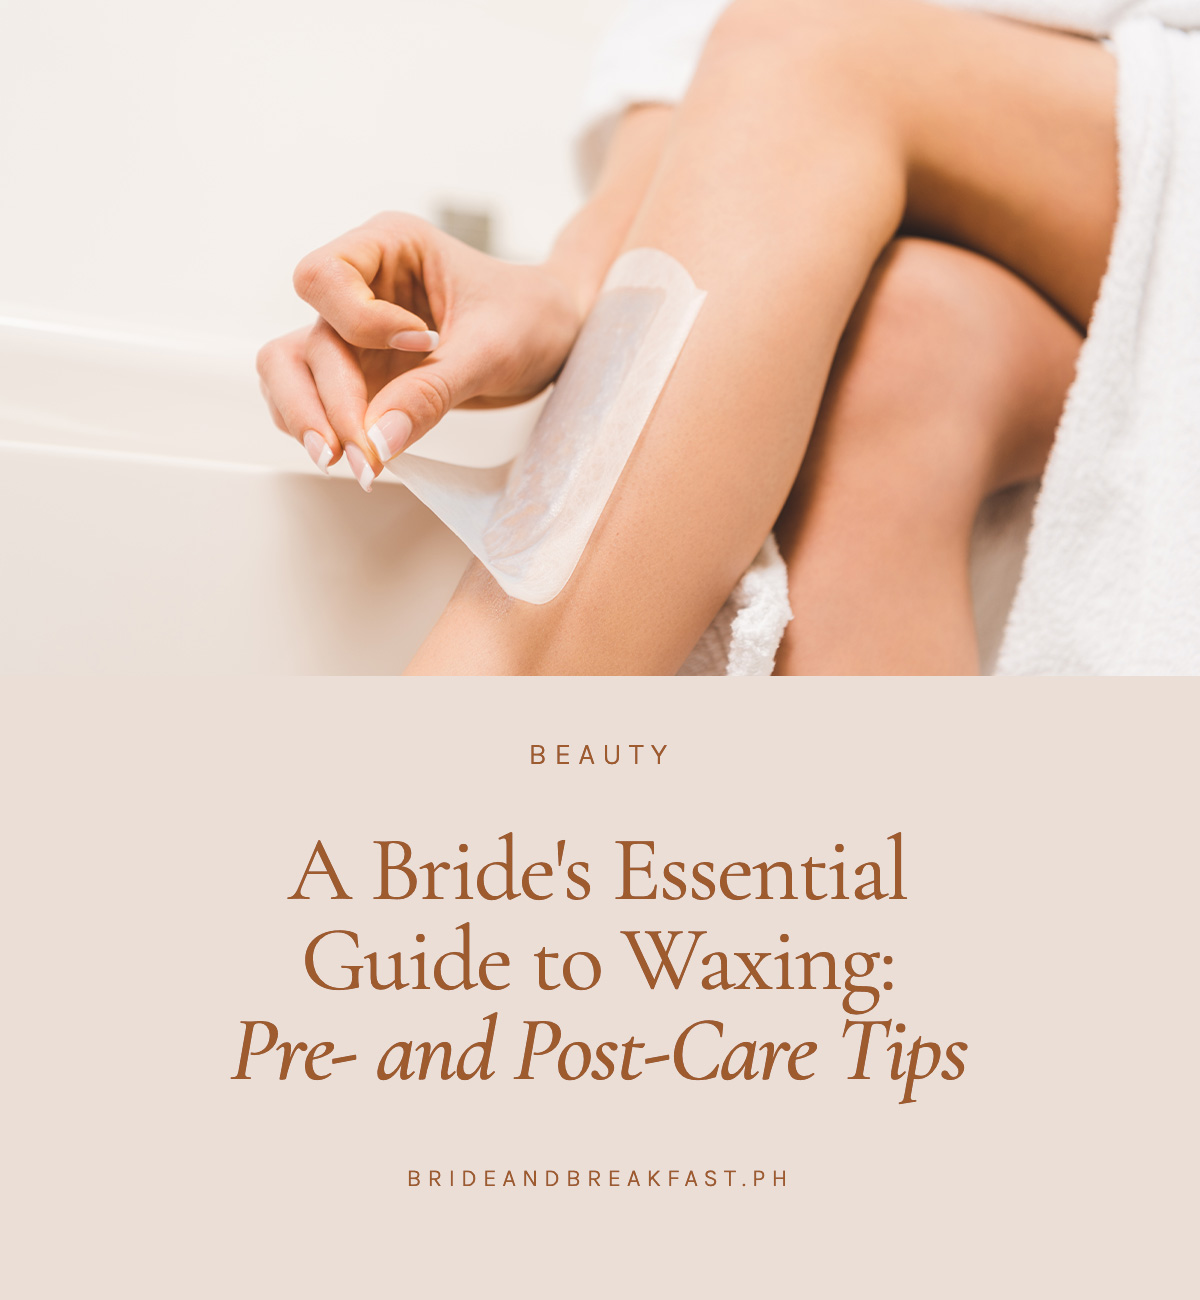 A Bride's Essential Guide to Waxing: Pre- and Post- Care Tips